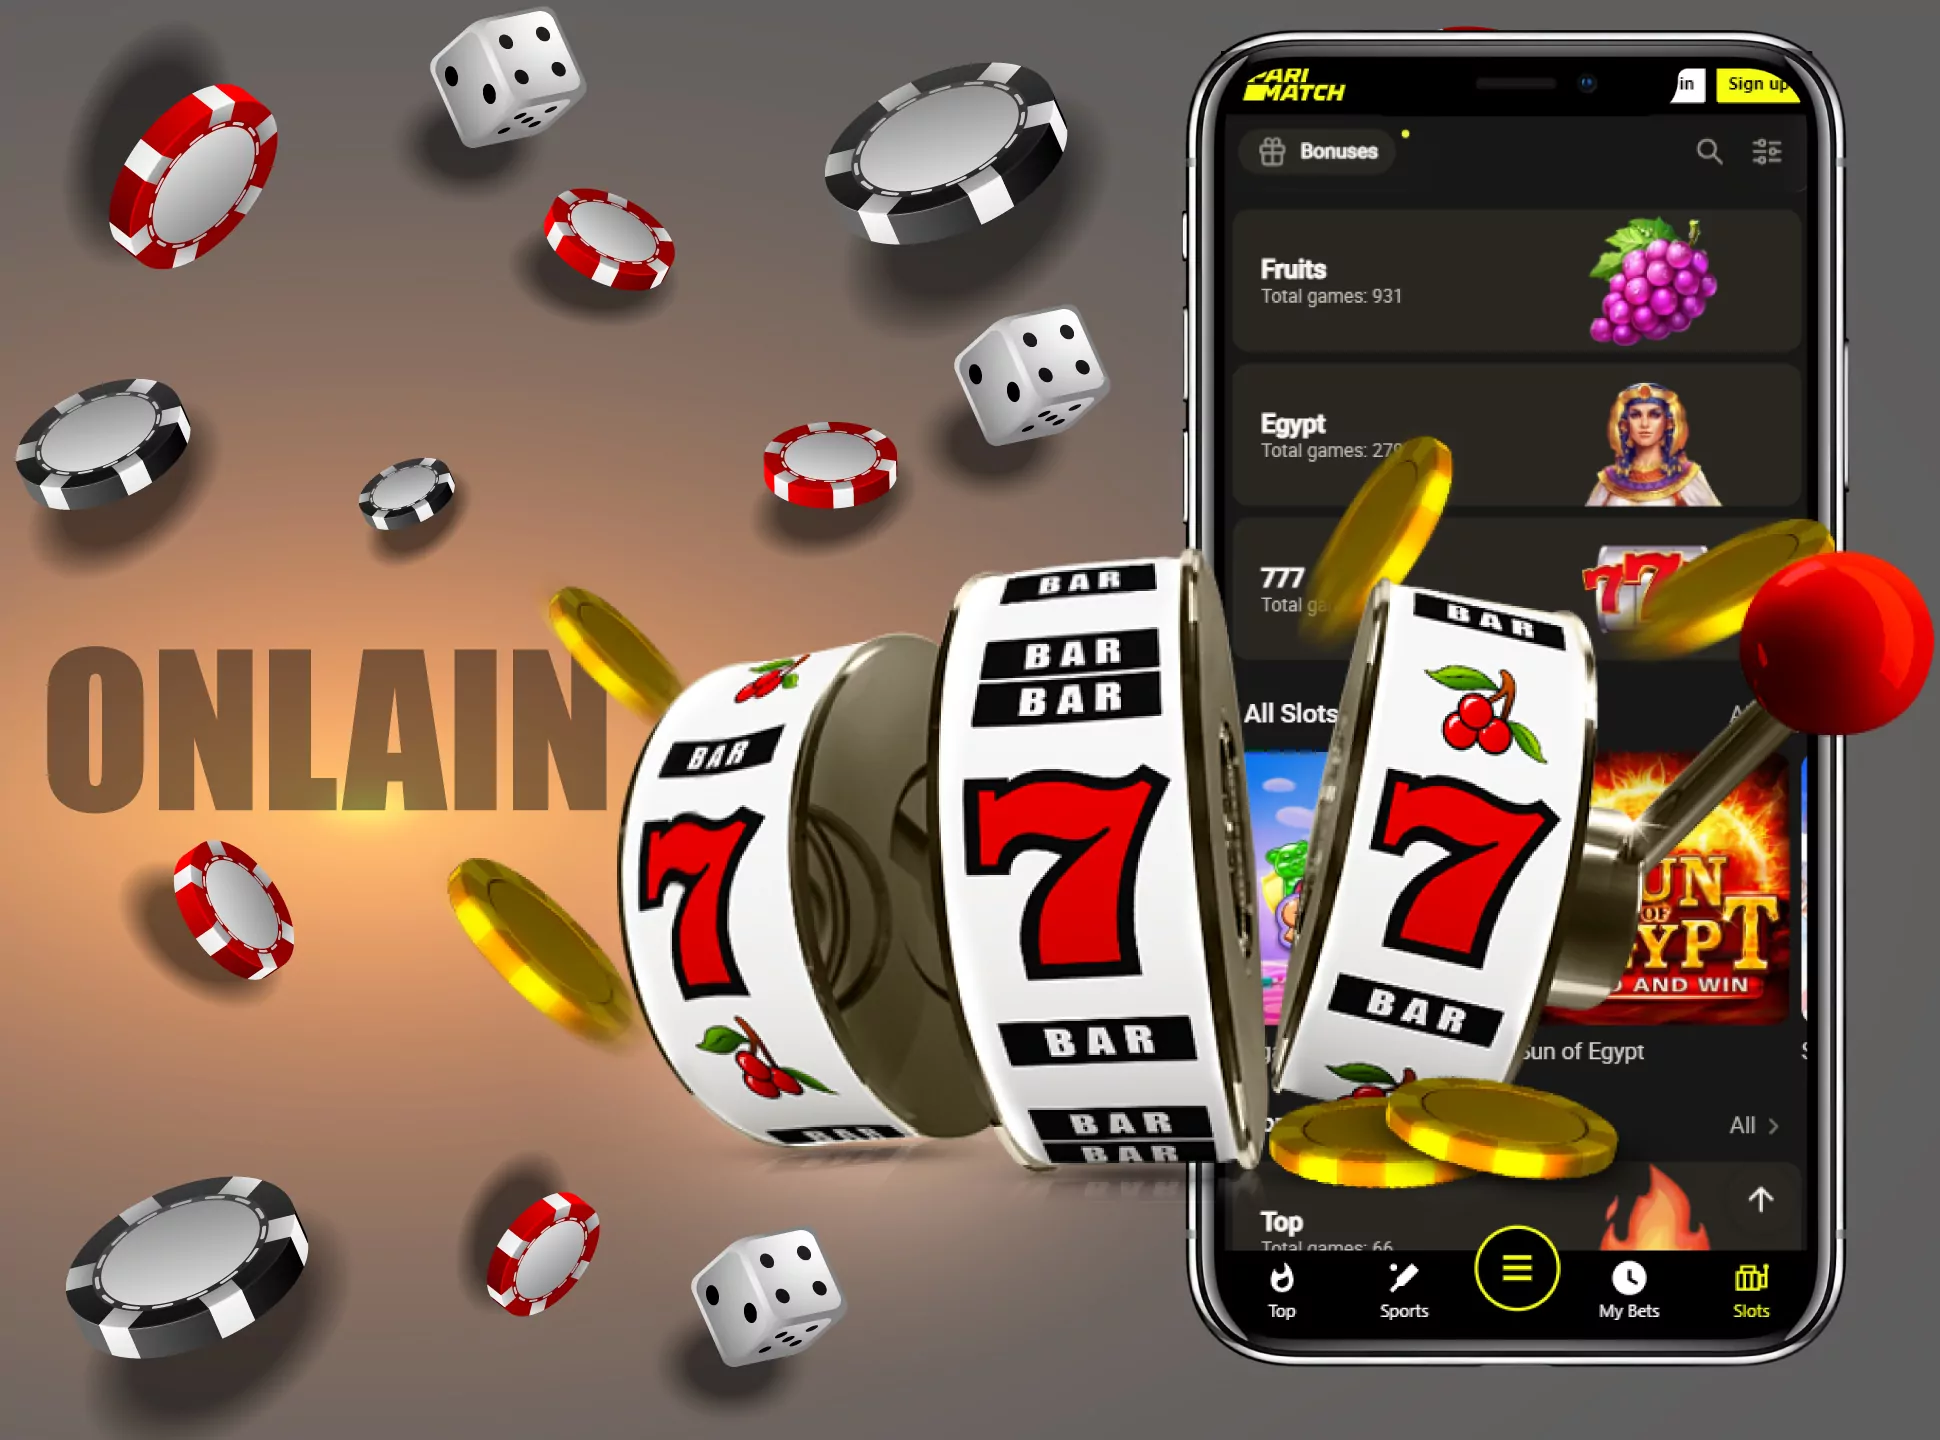 Online slots are the most popular entertainment and are available in the casino apps.